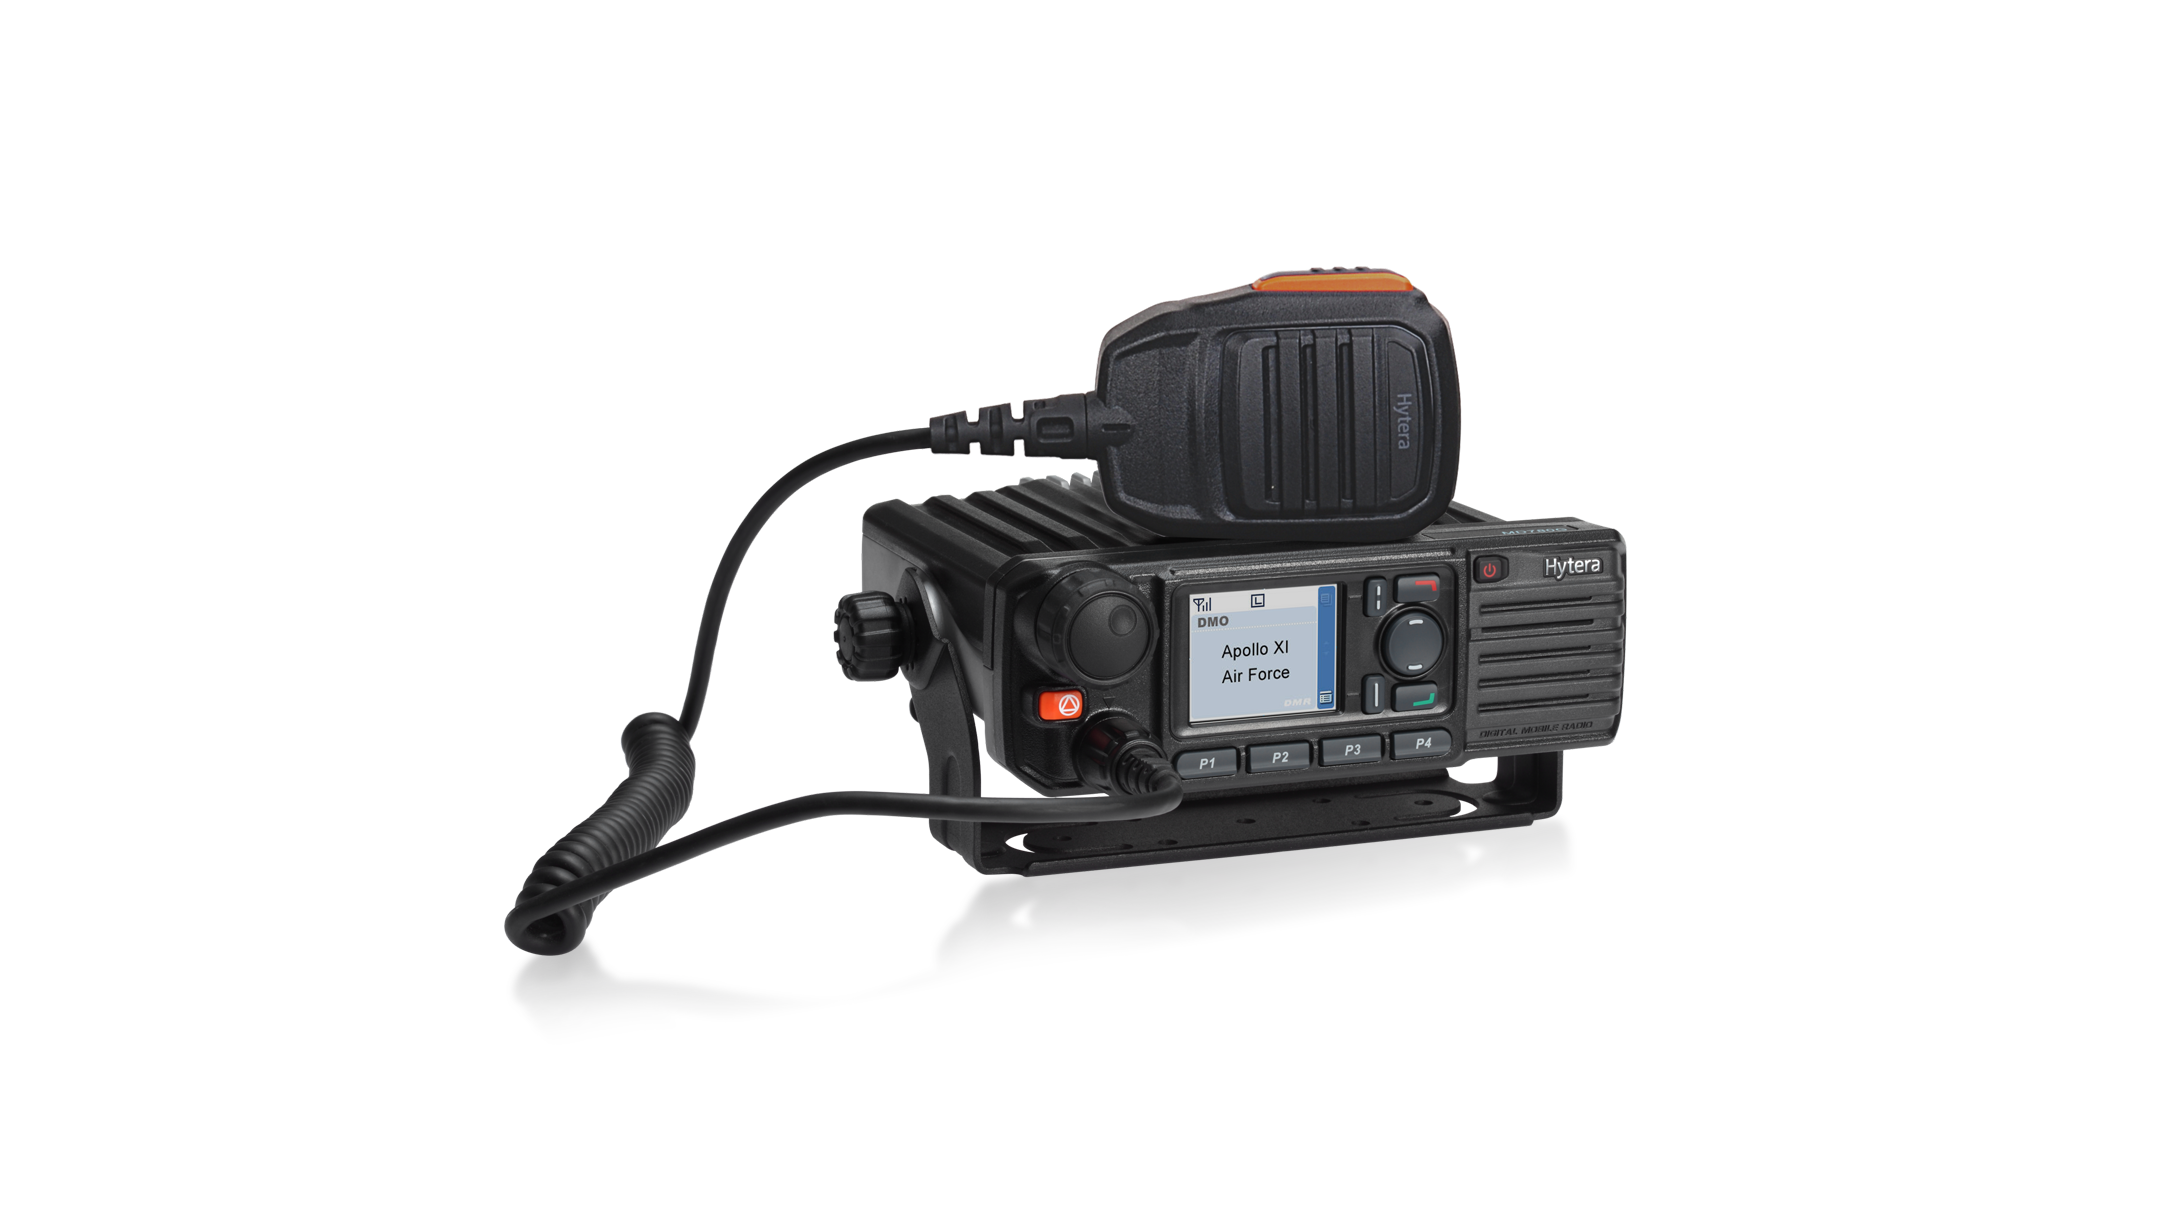 MD78X Professional DMR Mobile Two-way Radio